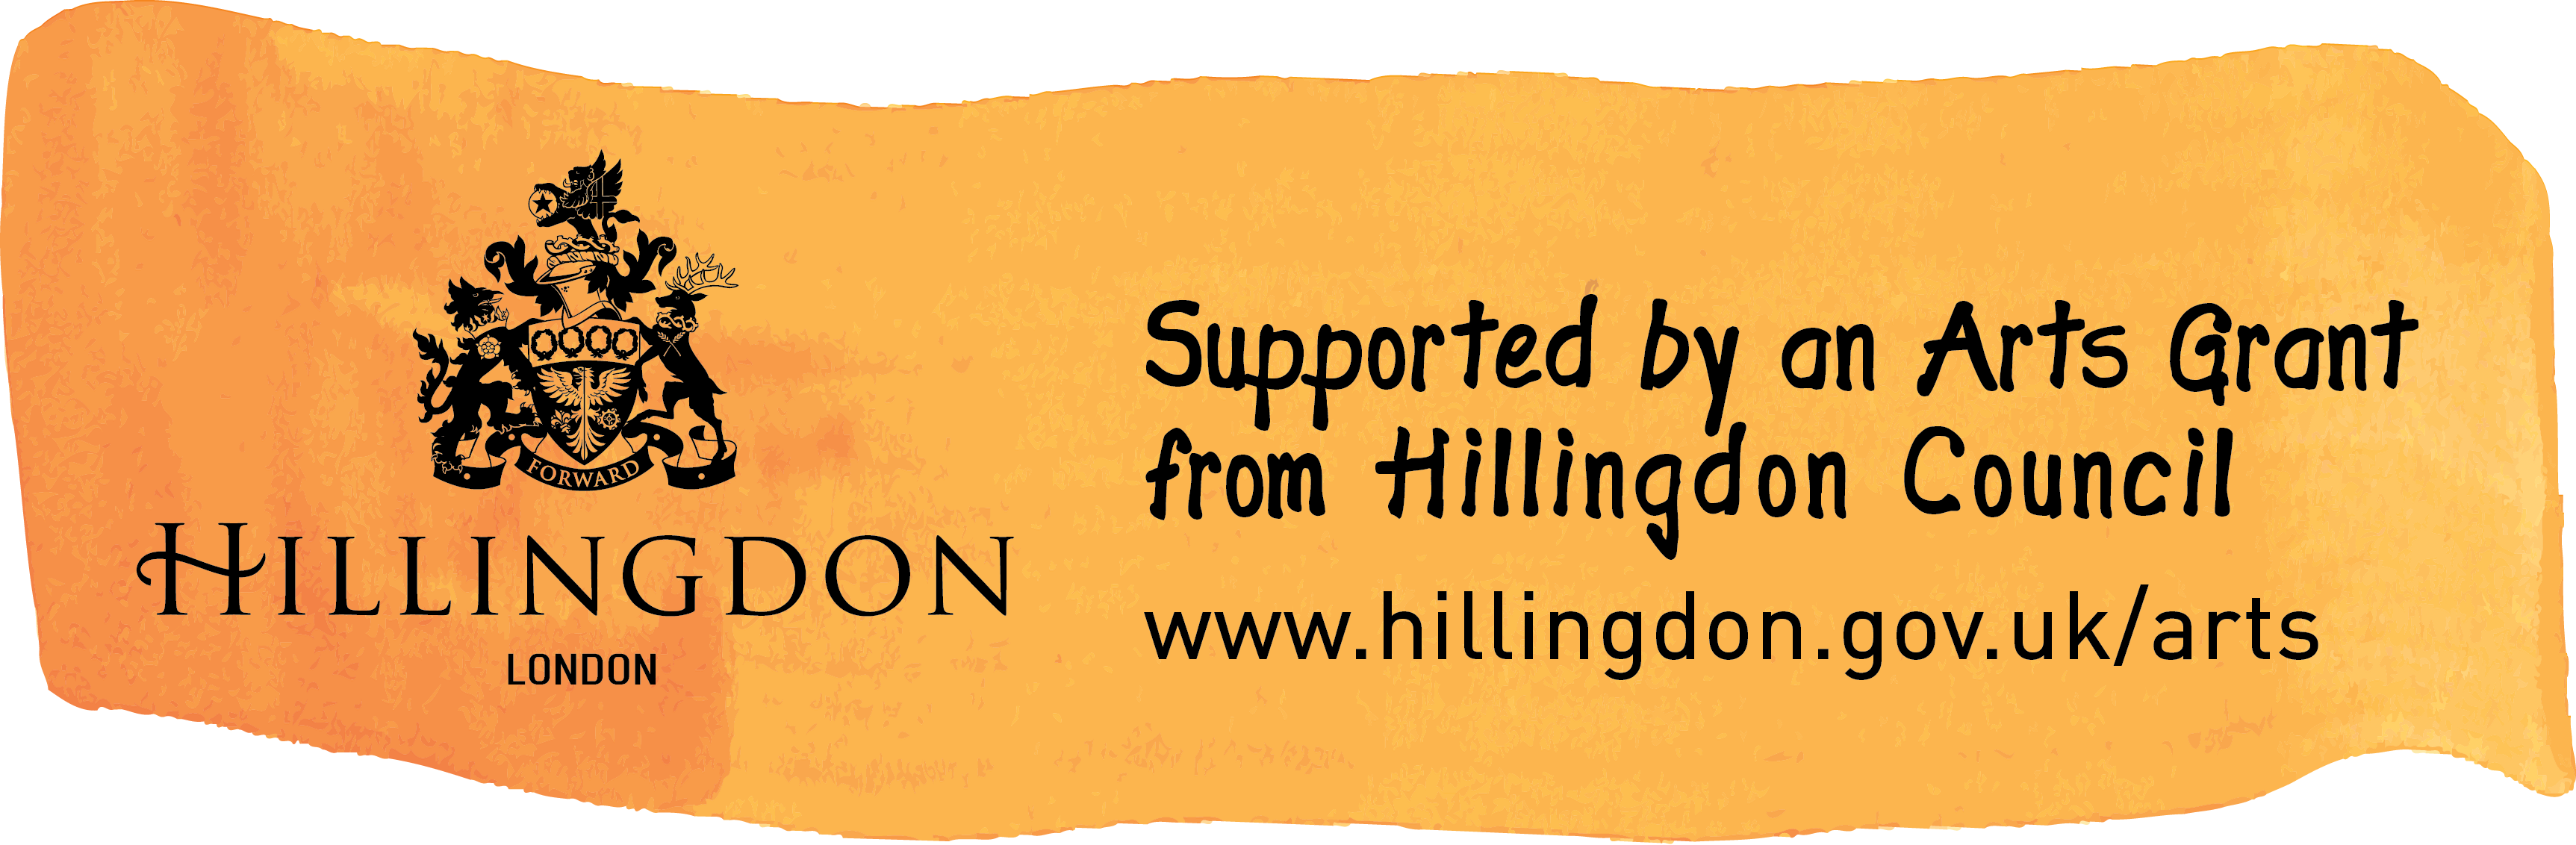 Supported by an arts grant from Hillingdon Council